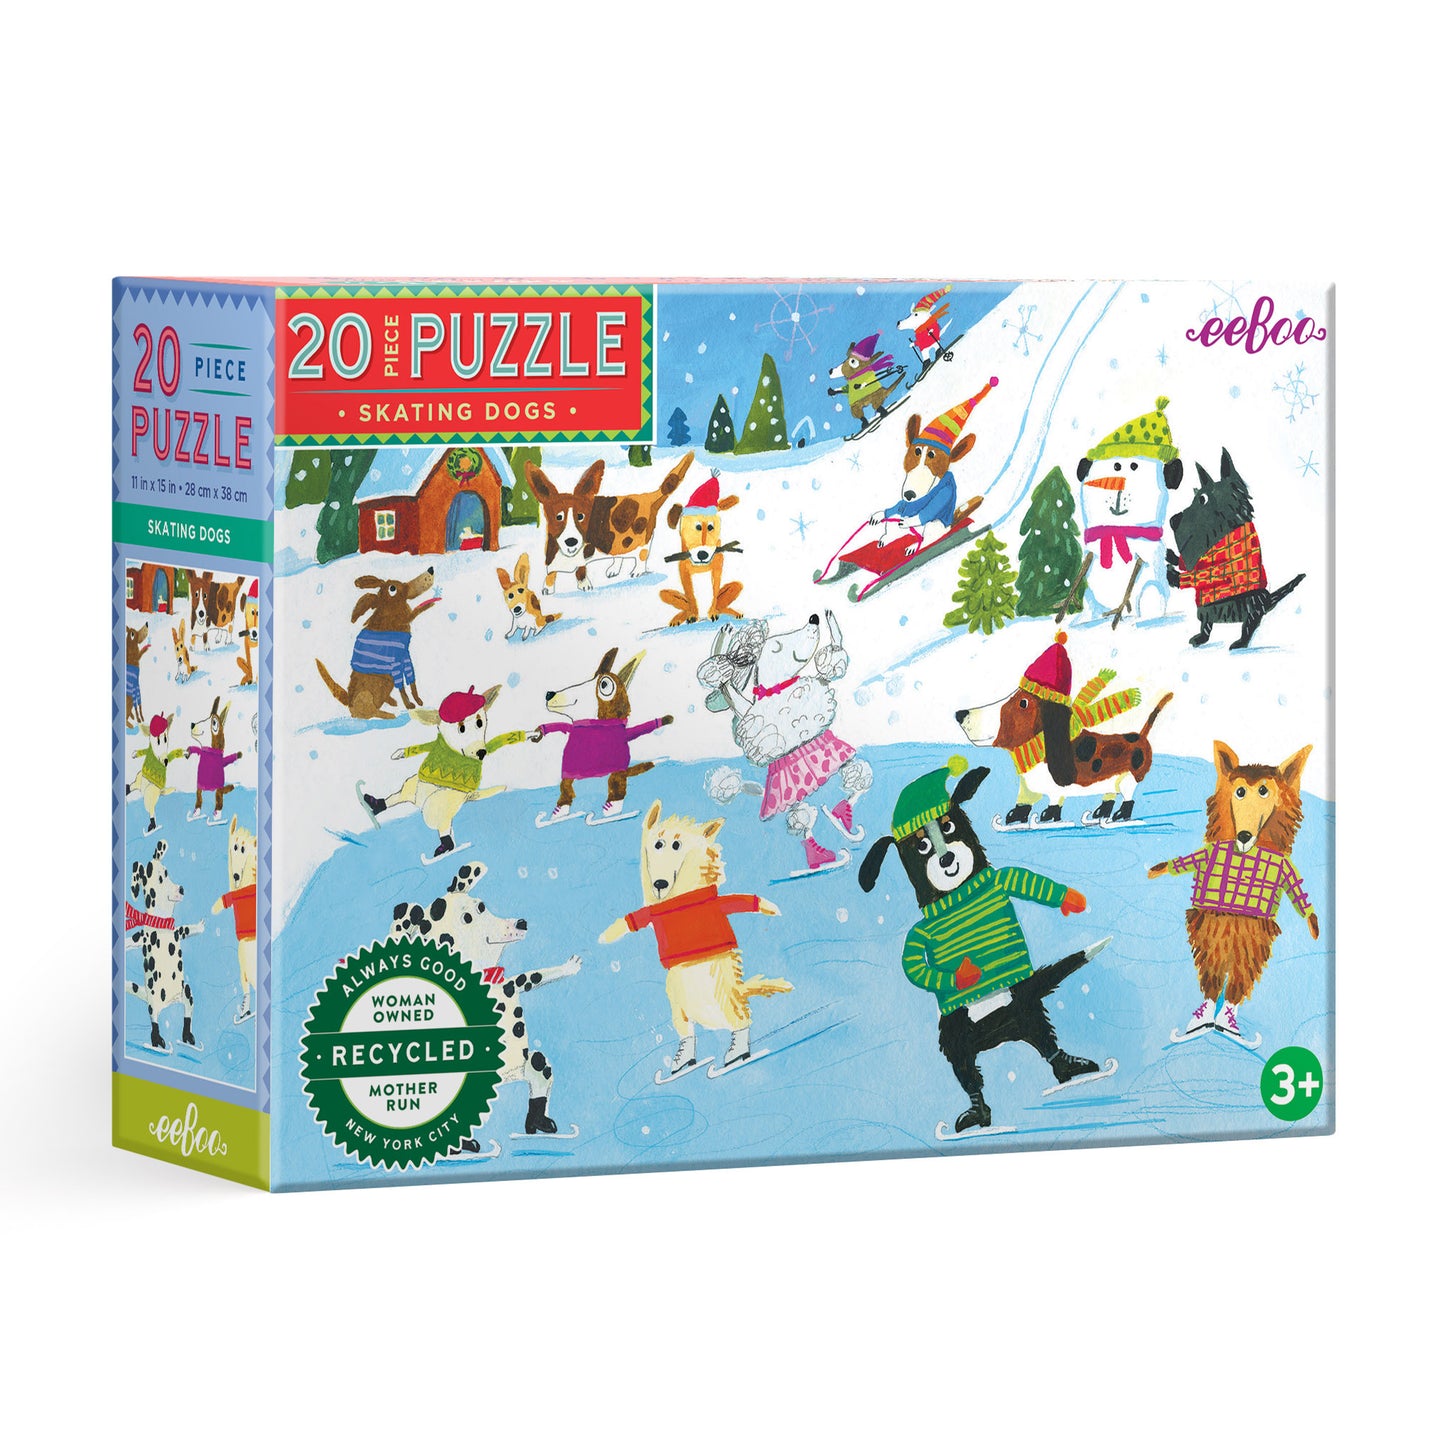 Skating Dogs 20 Piece Holiday Jigsaw Puzzle eeBoo Unique Gift for Kids